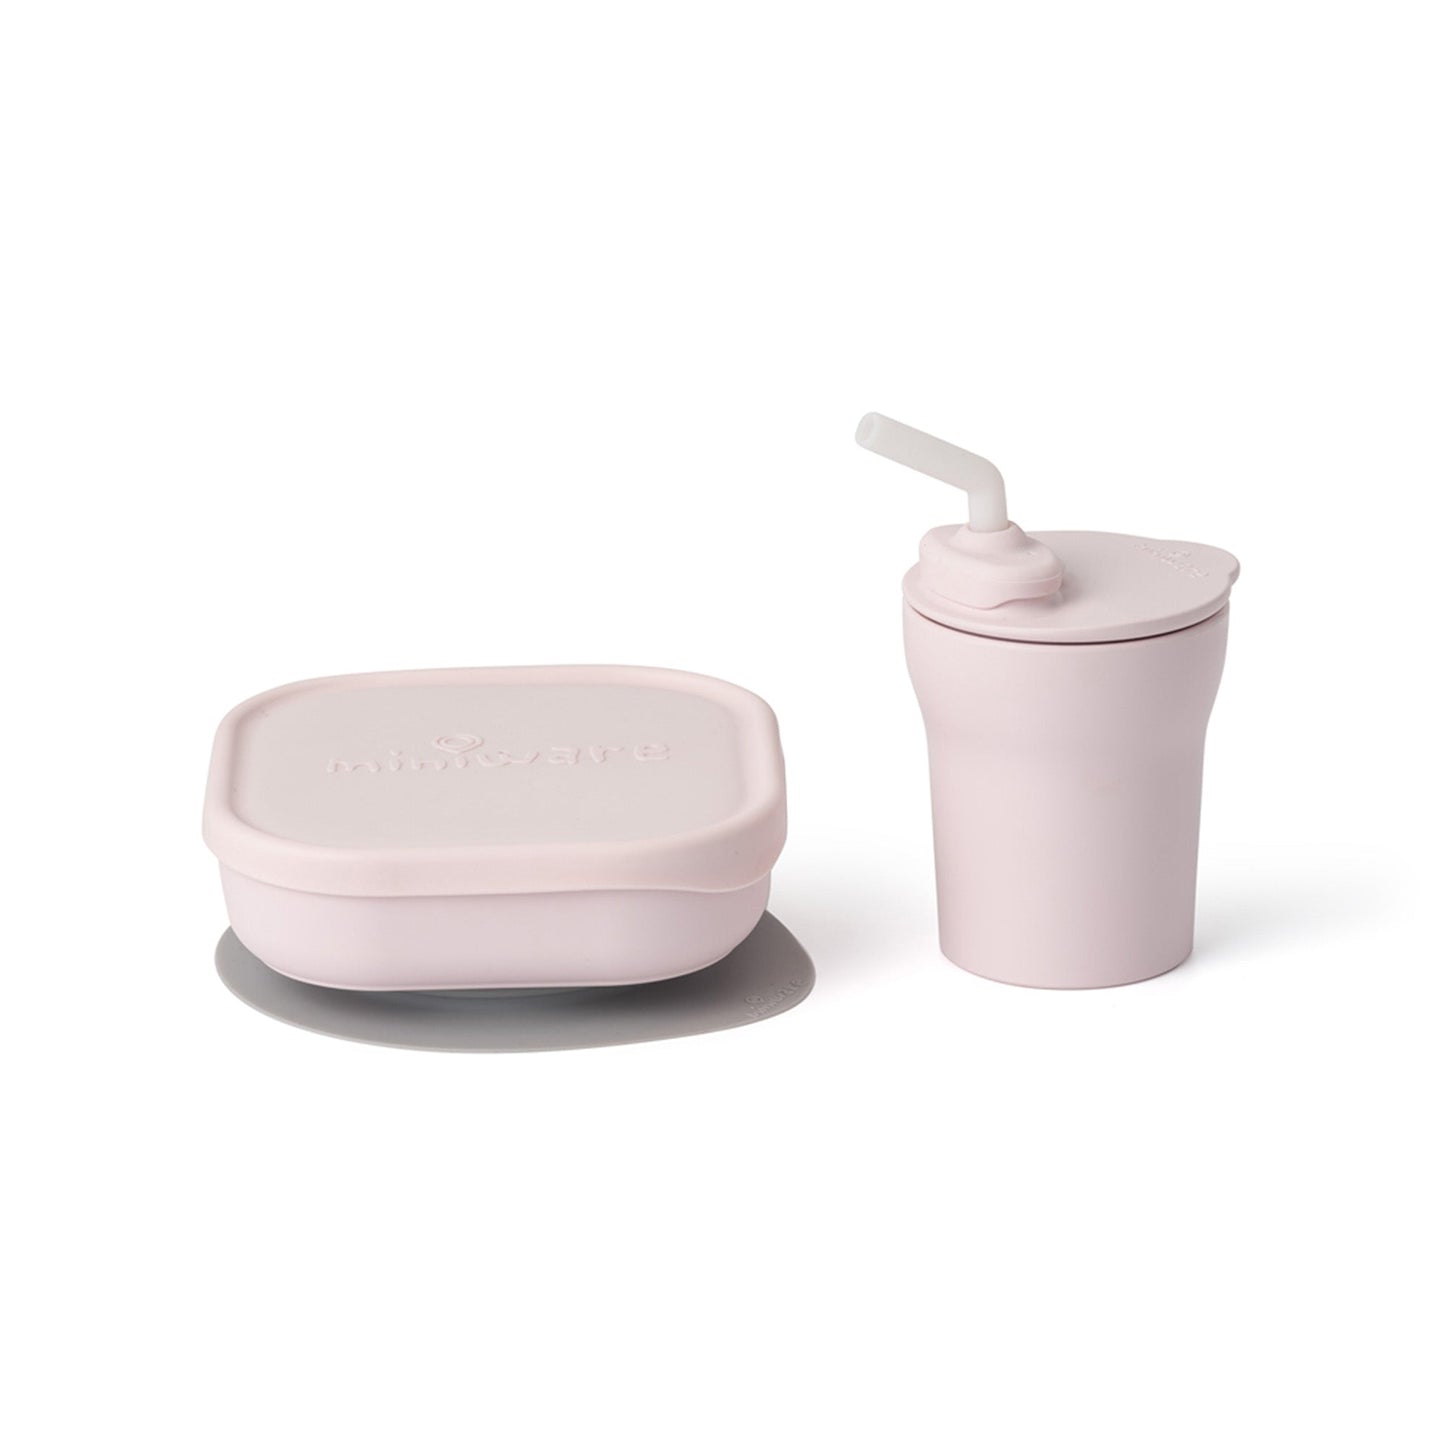 Sip & Snack Set (Cotton Candy/Cotton Candy)